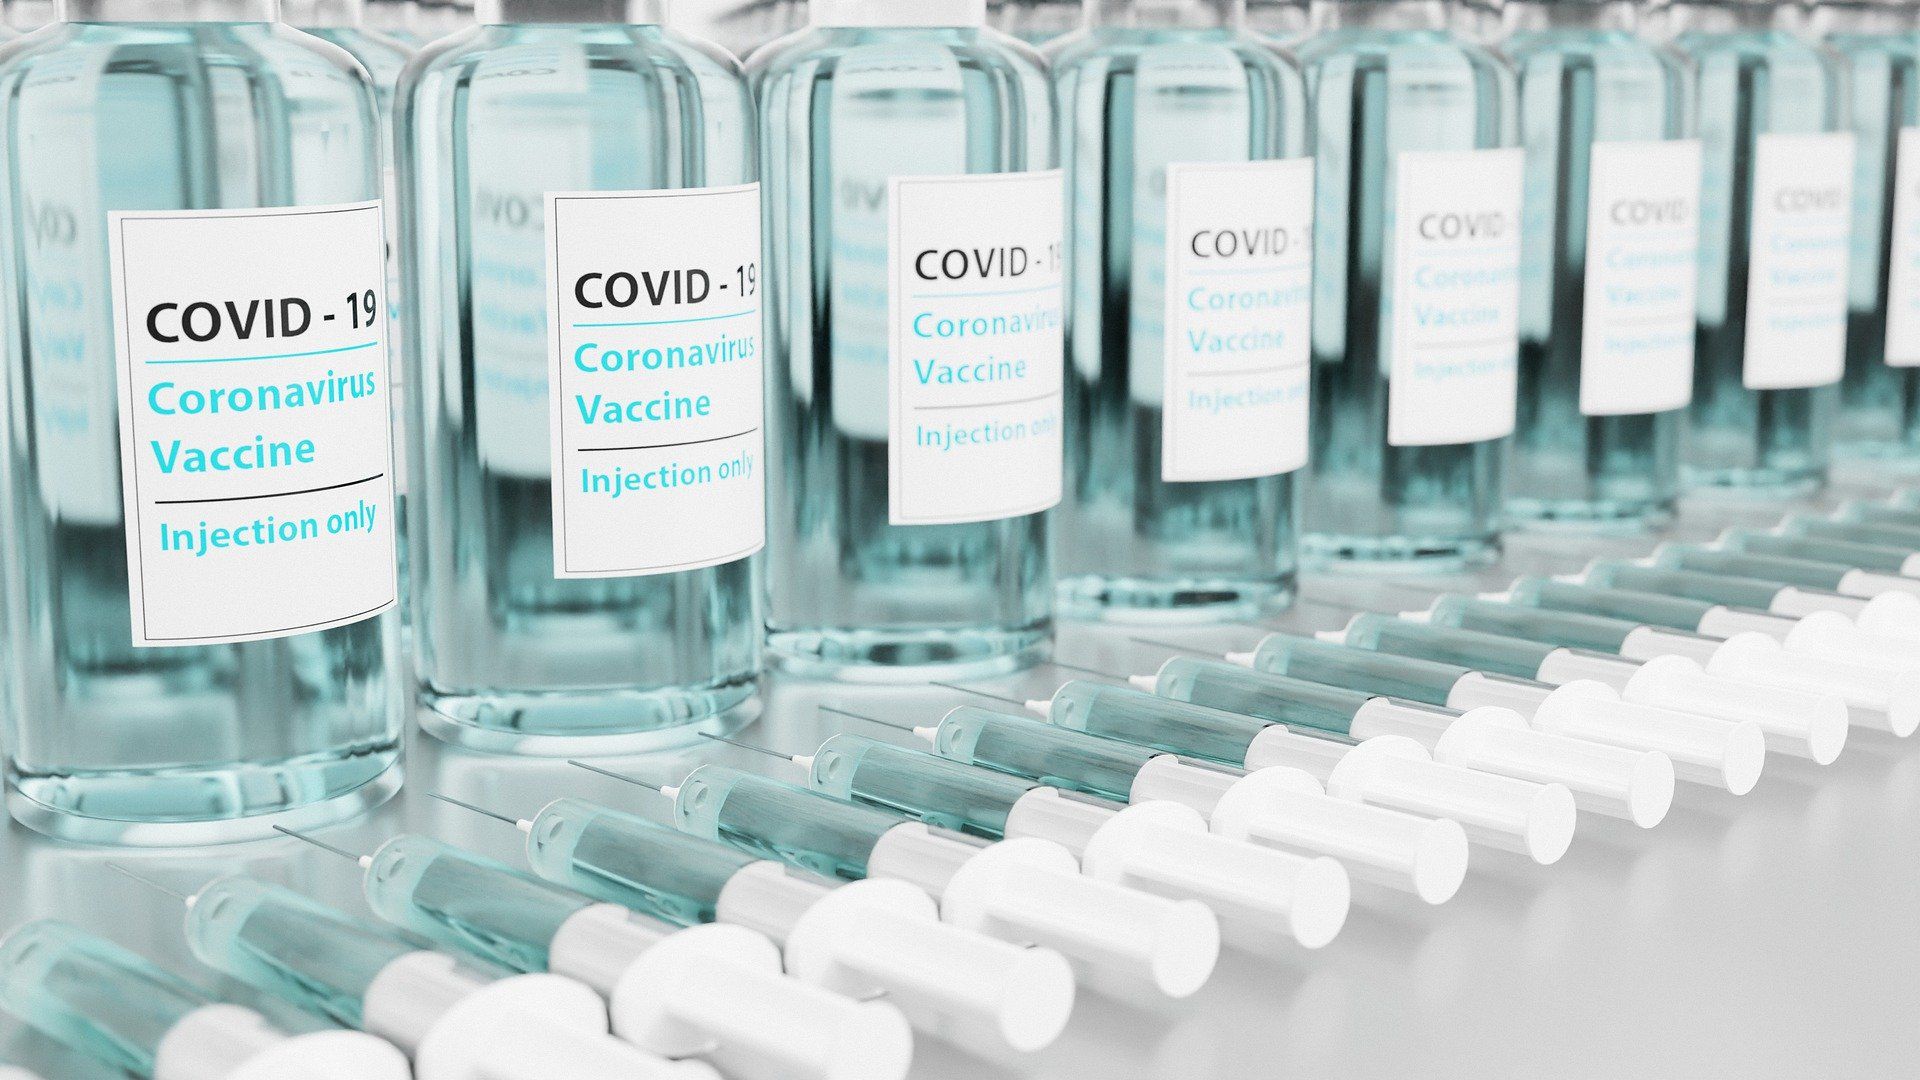 Single shot of COVID vaccine enough for recovered patients: Studies